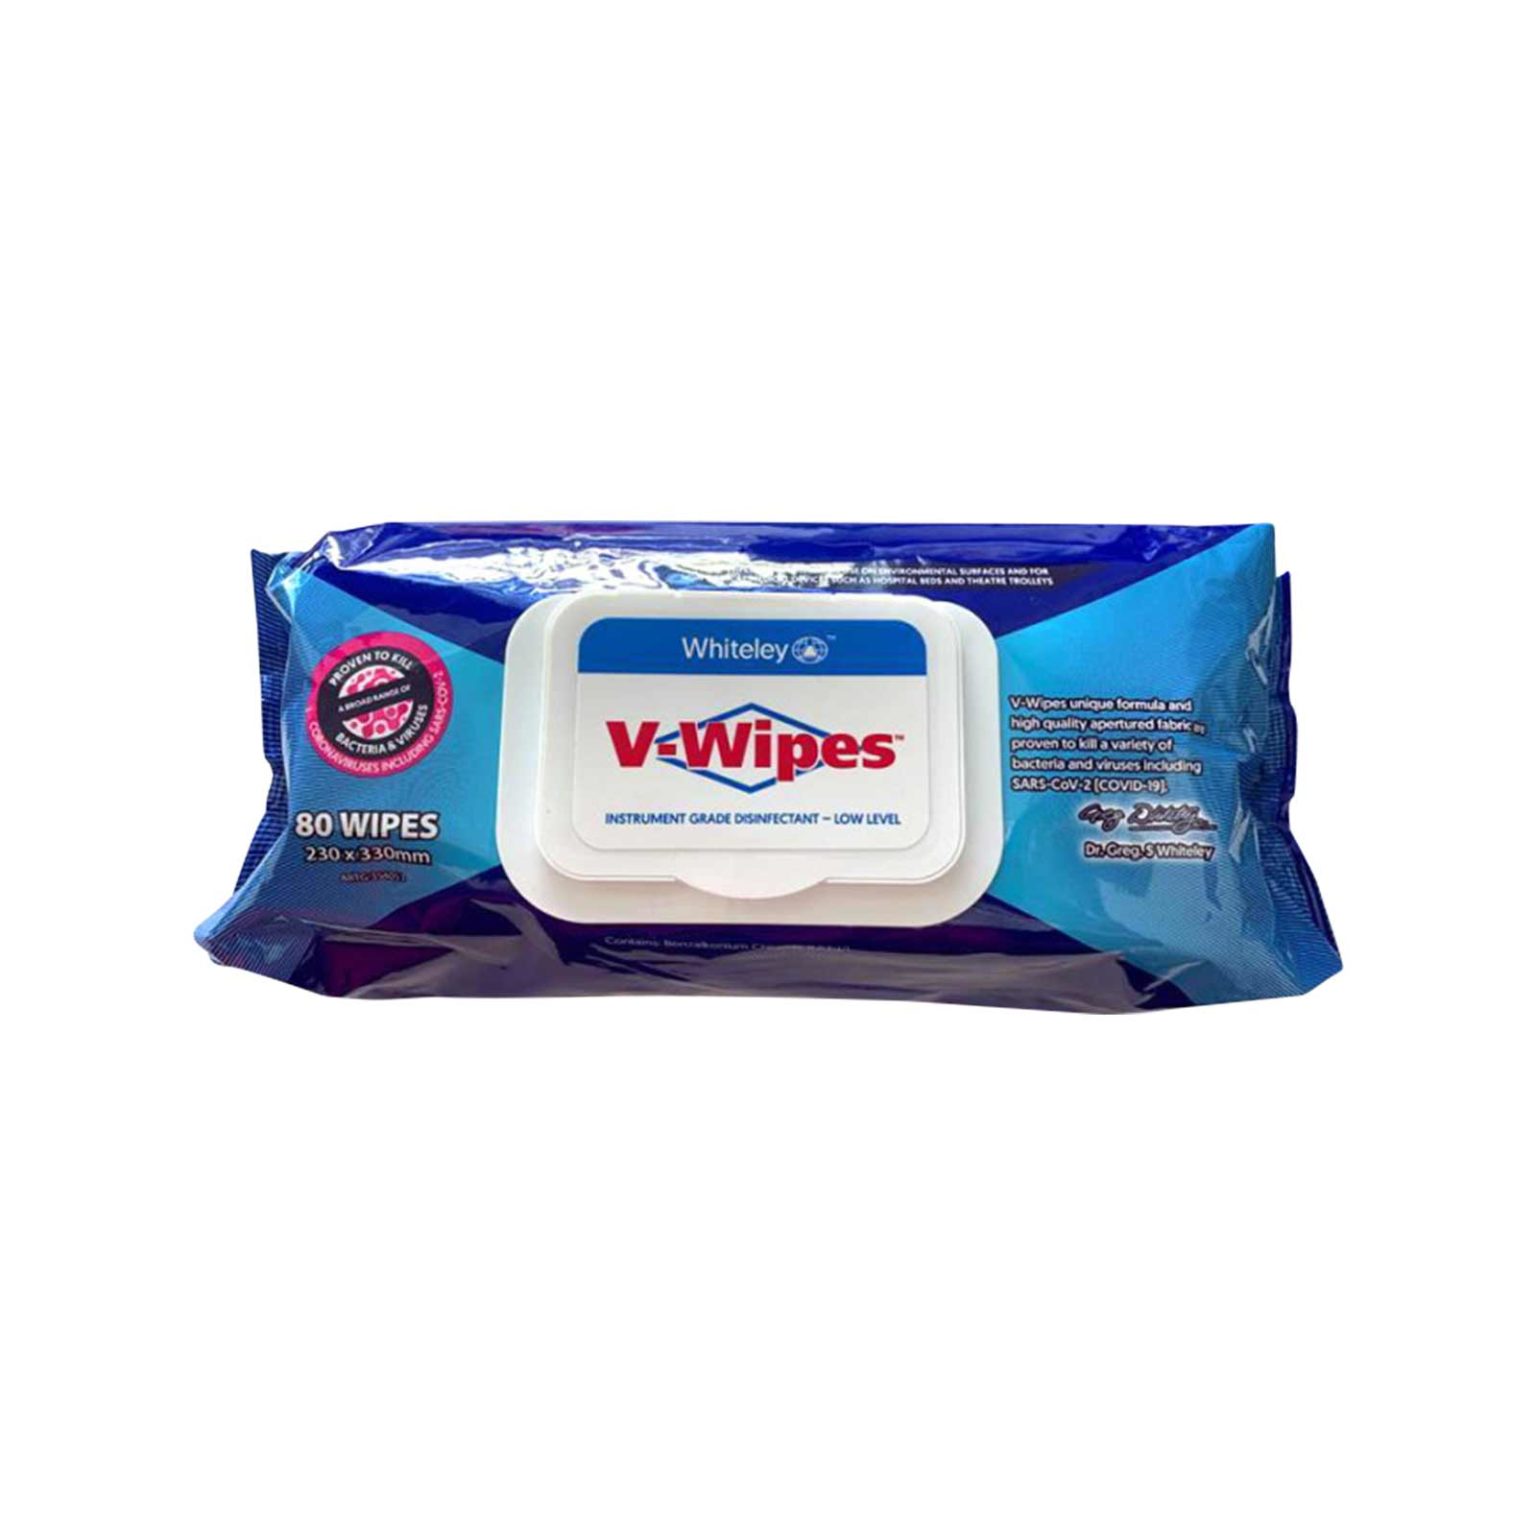 WC-210634-Whiteley-V-Wipes-Instrument-Grade-Disinfectant-Low-Level-pH-Neutral-Non-Corrosive-Front-80-Wipes